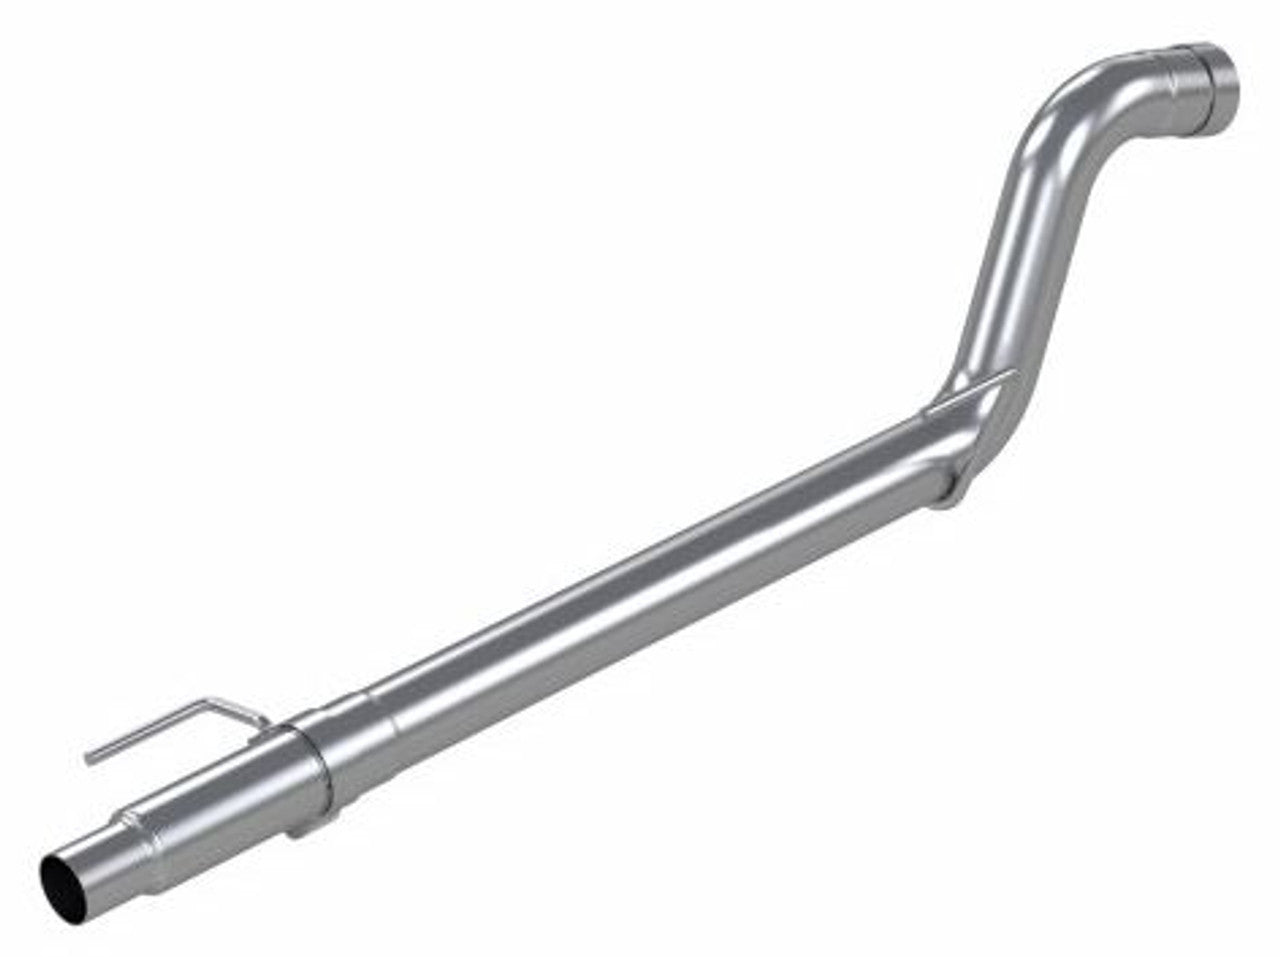 MBRP 3" Muffler Bypass 2015-2020 Ford F150 5.0L, 2.7L/3.5L EcoBoost, T409 Stainless Steel,